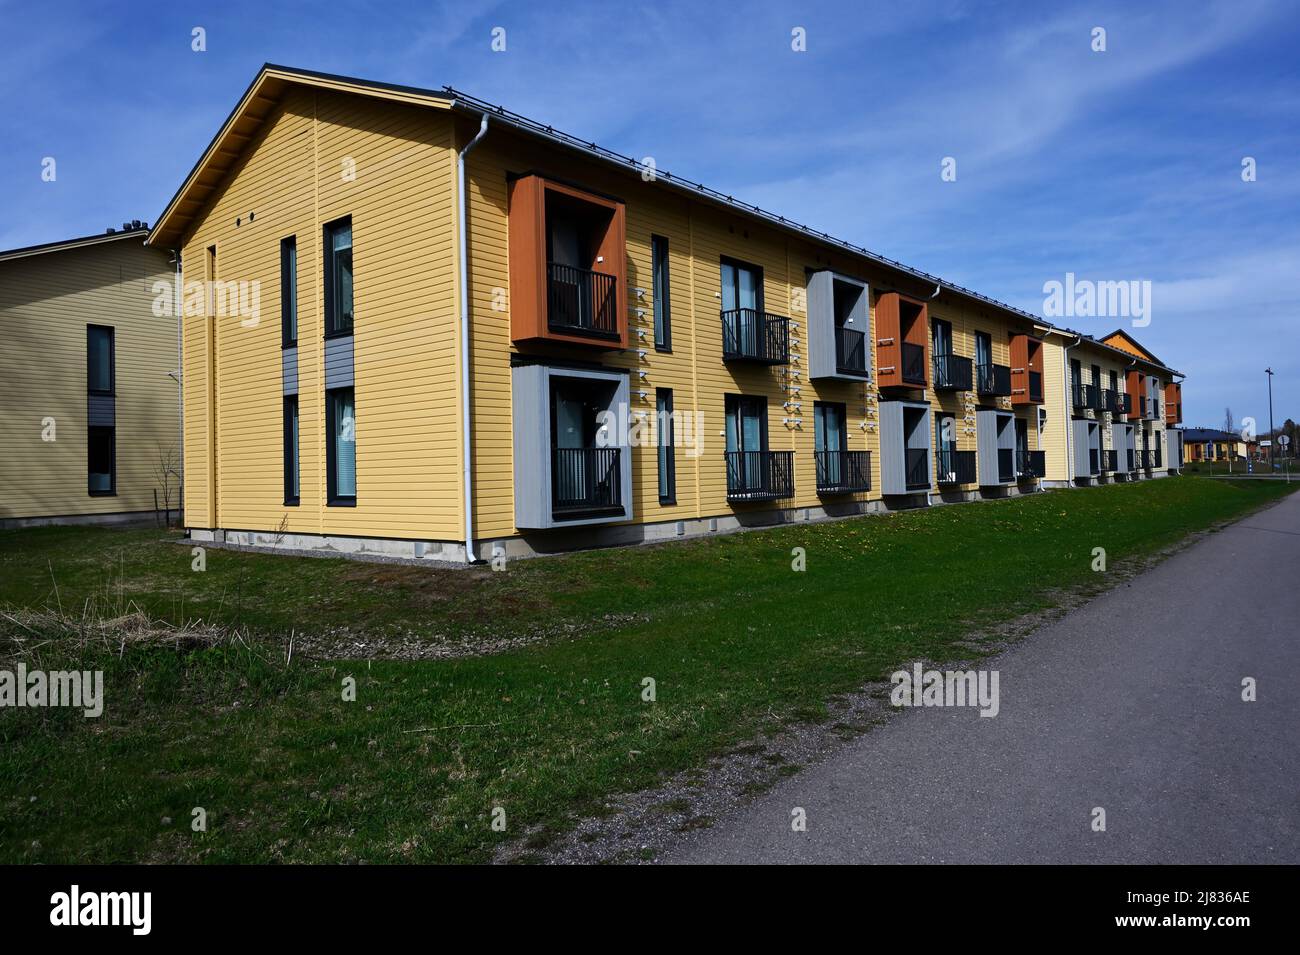 residential area of typical houses in Finland Stock Photo